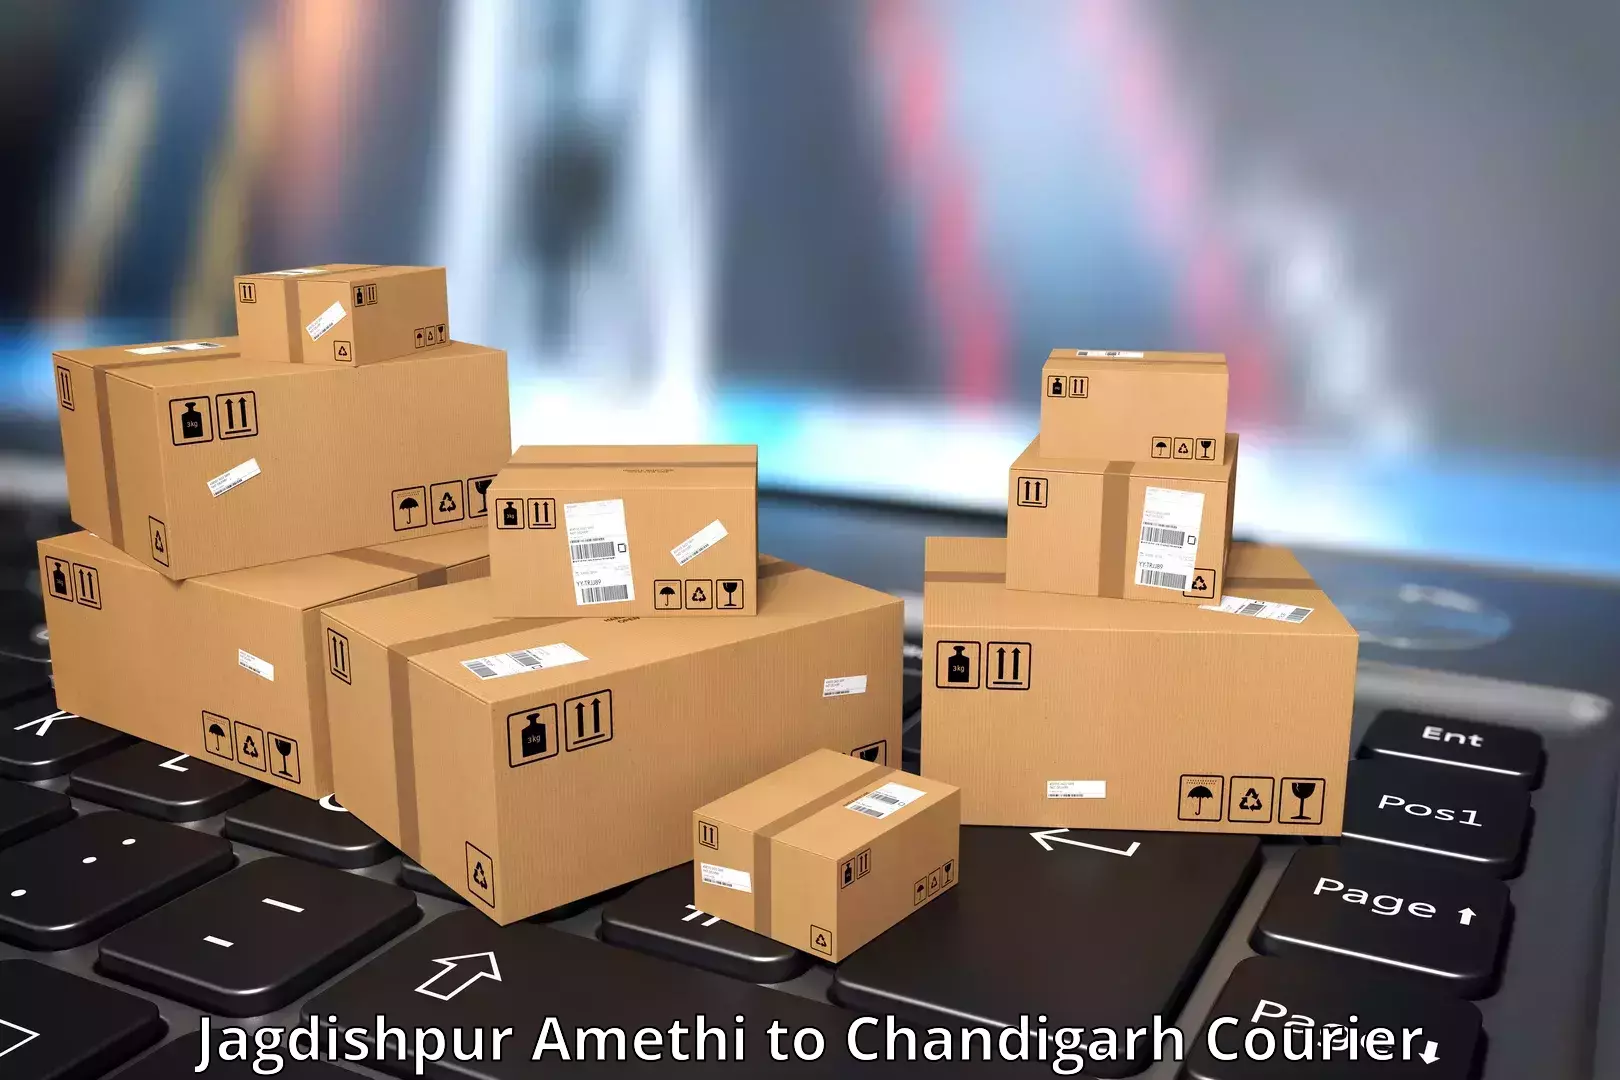 Subscription-based courier Jagdishpur Amethi to Chandigarh